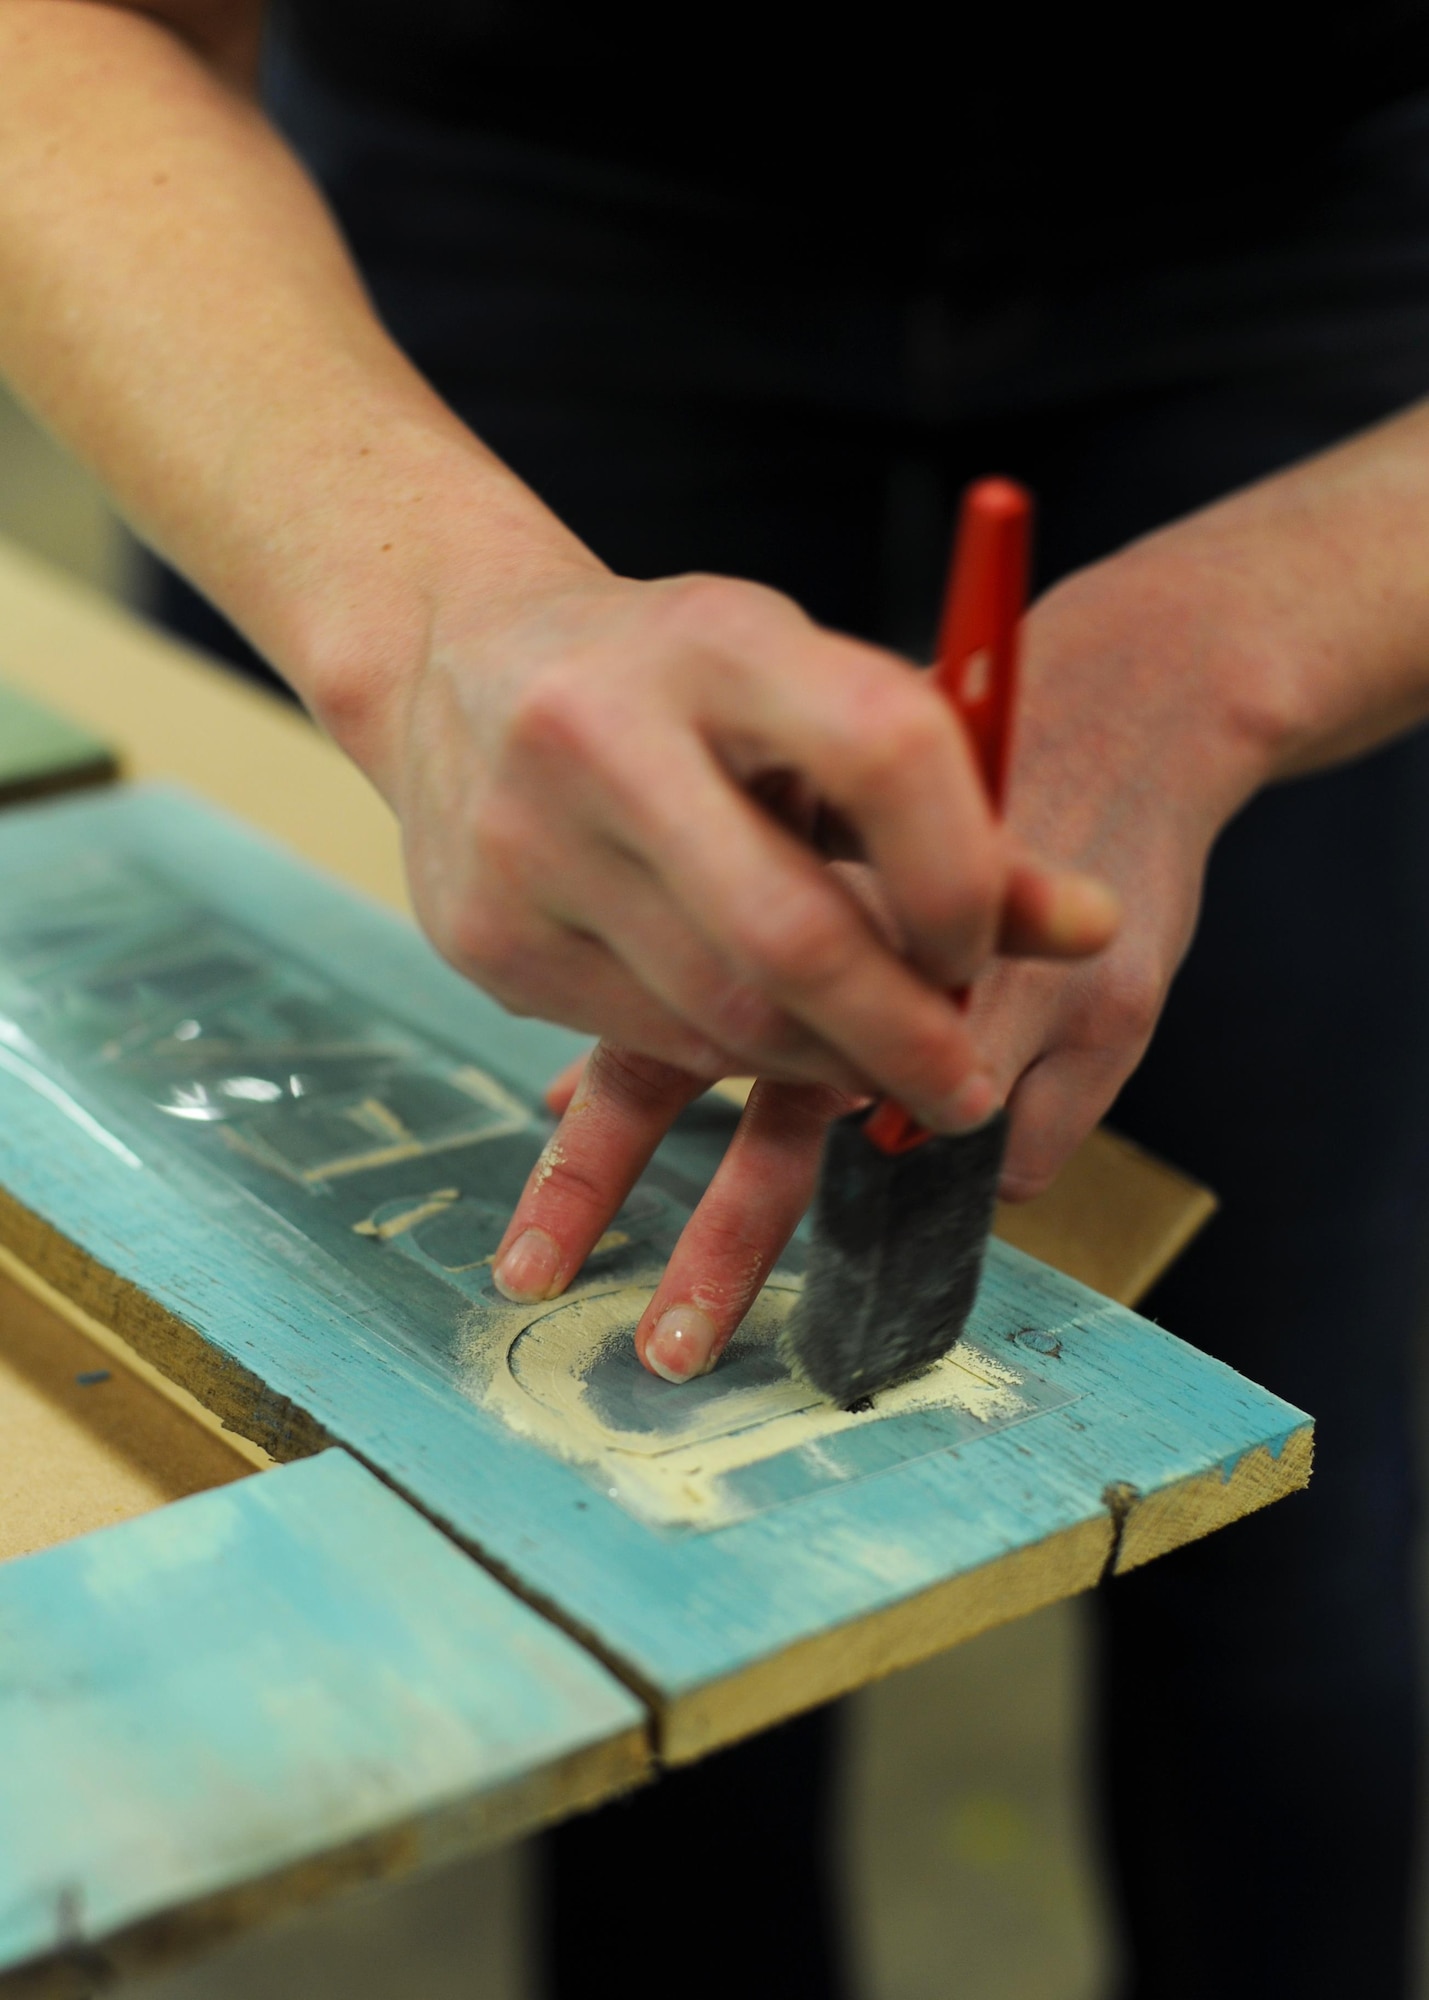 A customer uses a stencil to put words on a picture frame during a class Feb. 15, 2017, at the 19th Force Support Squadron Skills and Development Center Wood Frame Shop on Little Rock Air Force Base, Ark. Participants were given two hours to make their own unique decoration with the help of staff. (U.S. Air Force photo by Airman 1st Class Grace Nichols)